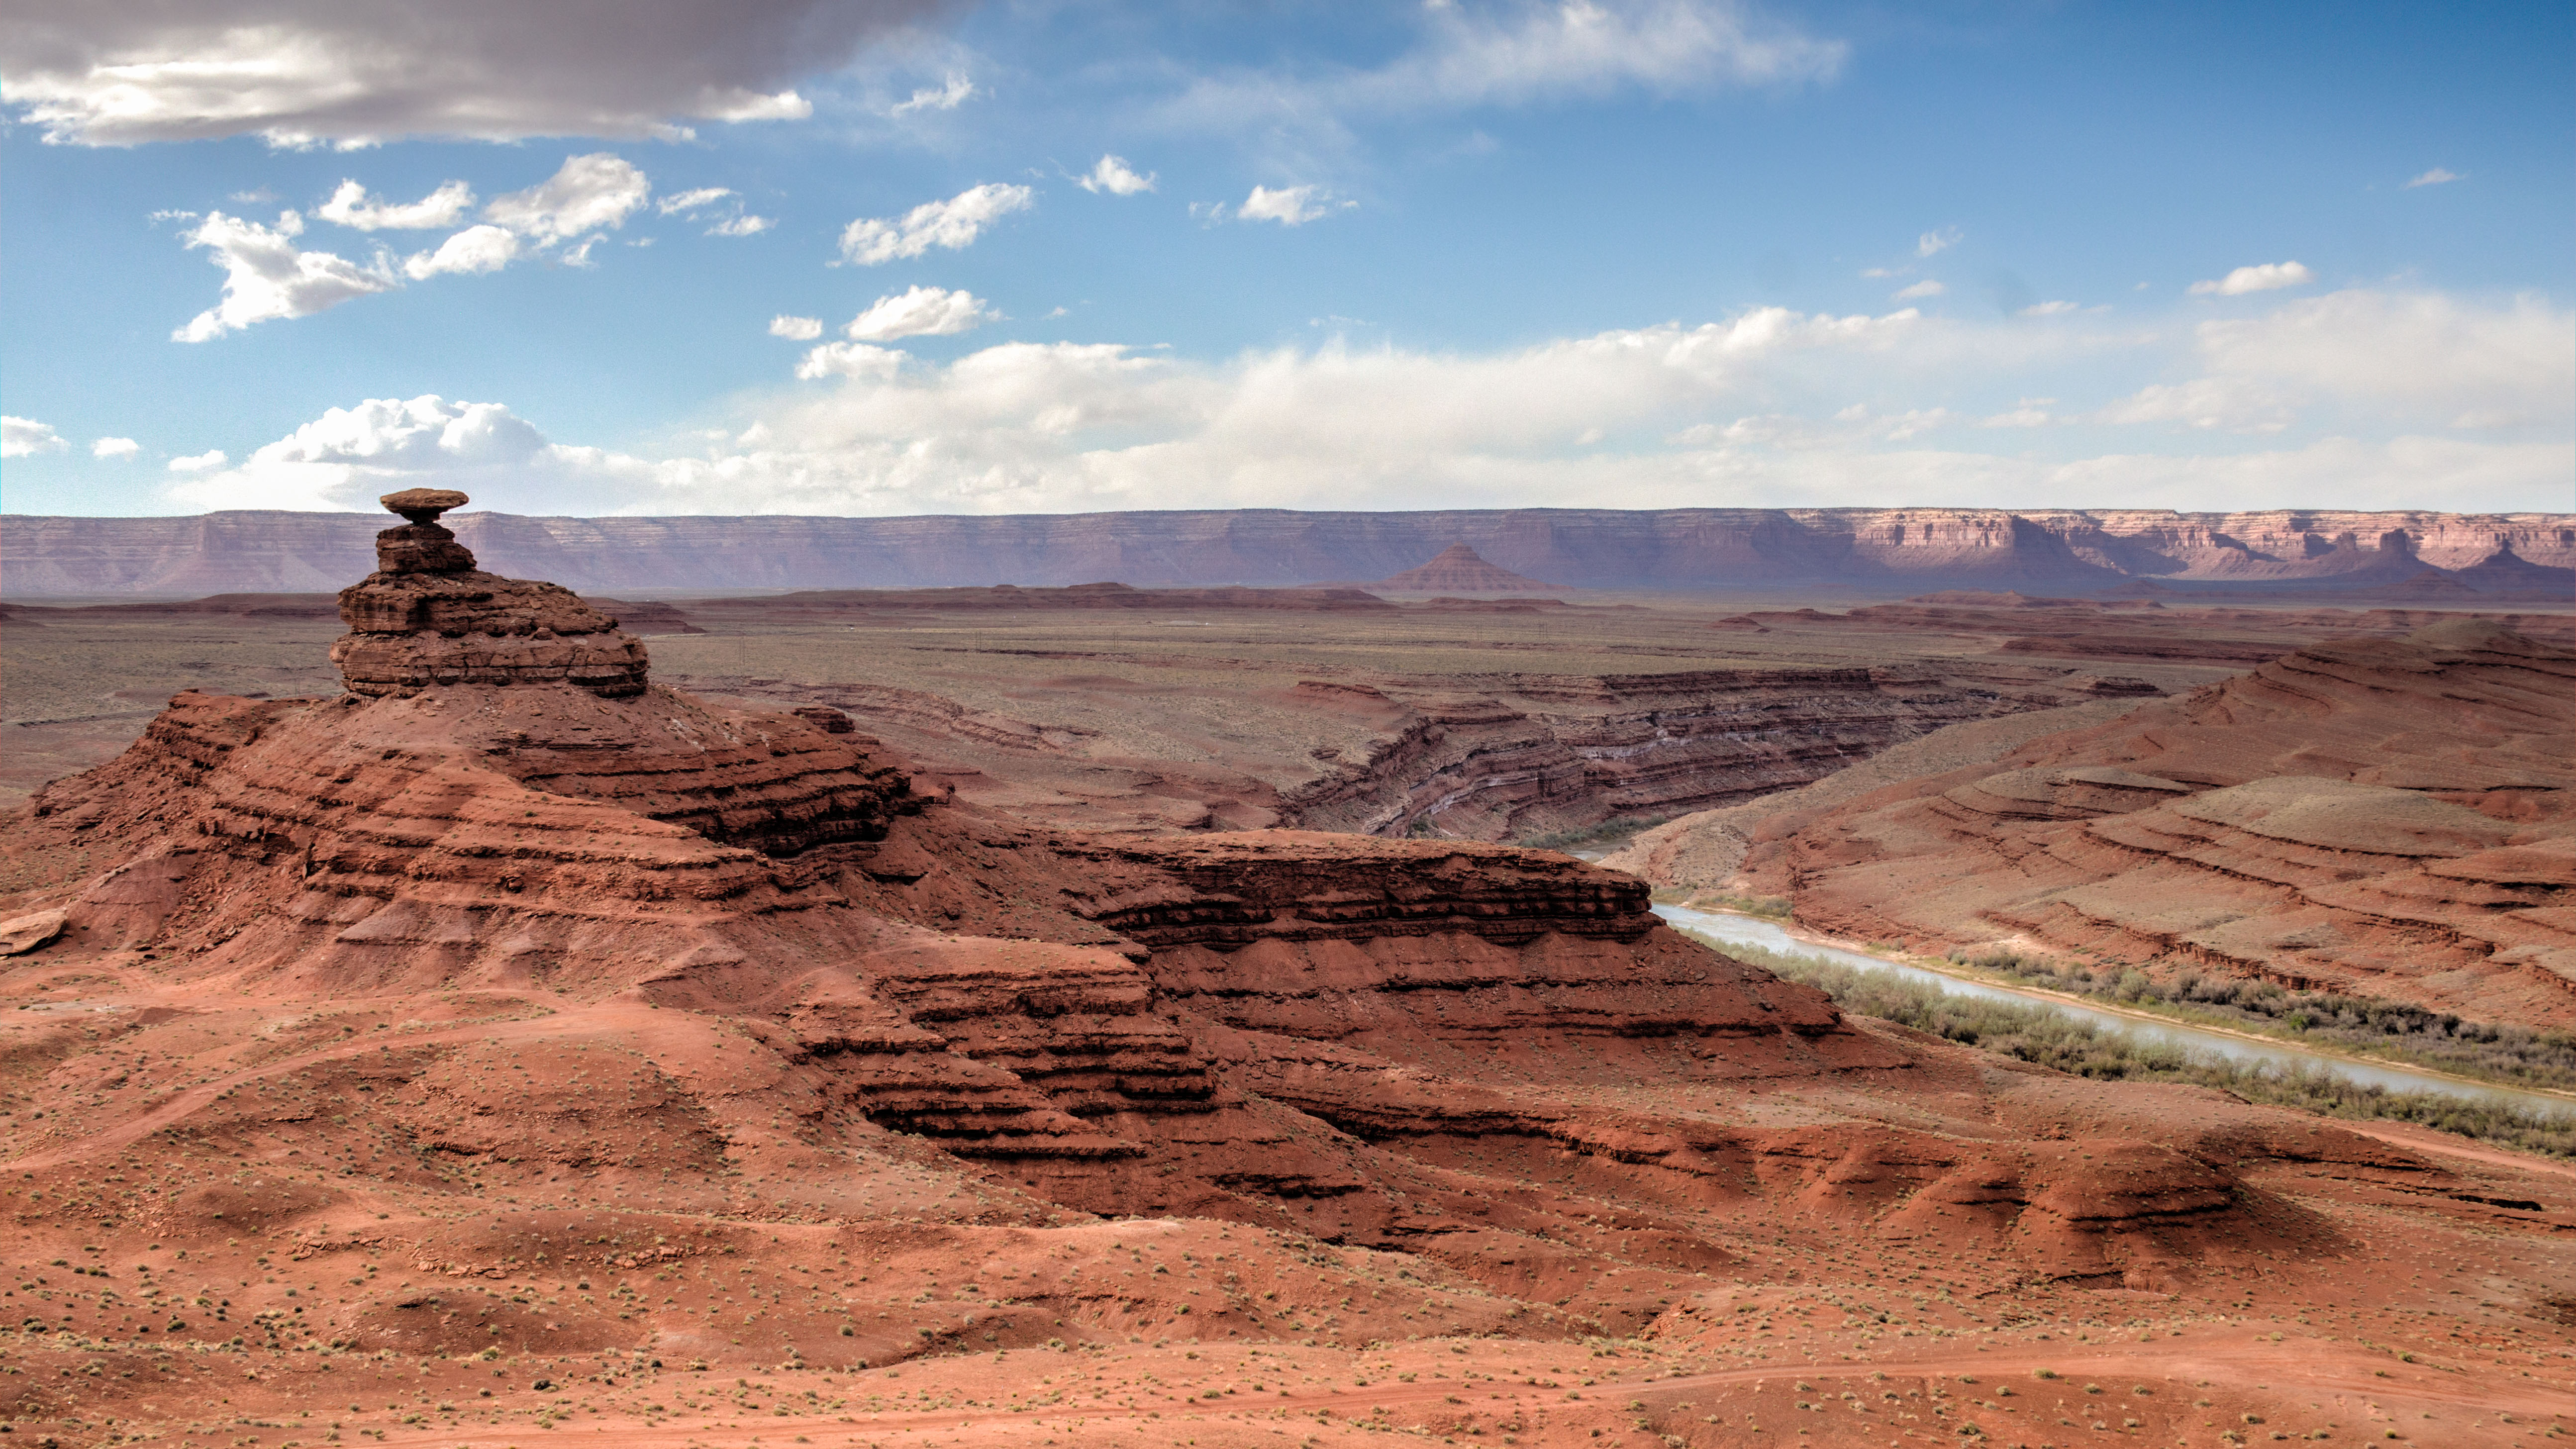 Mexican Hat Rock